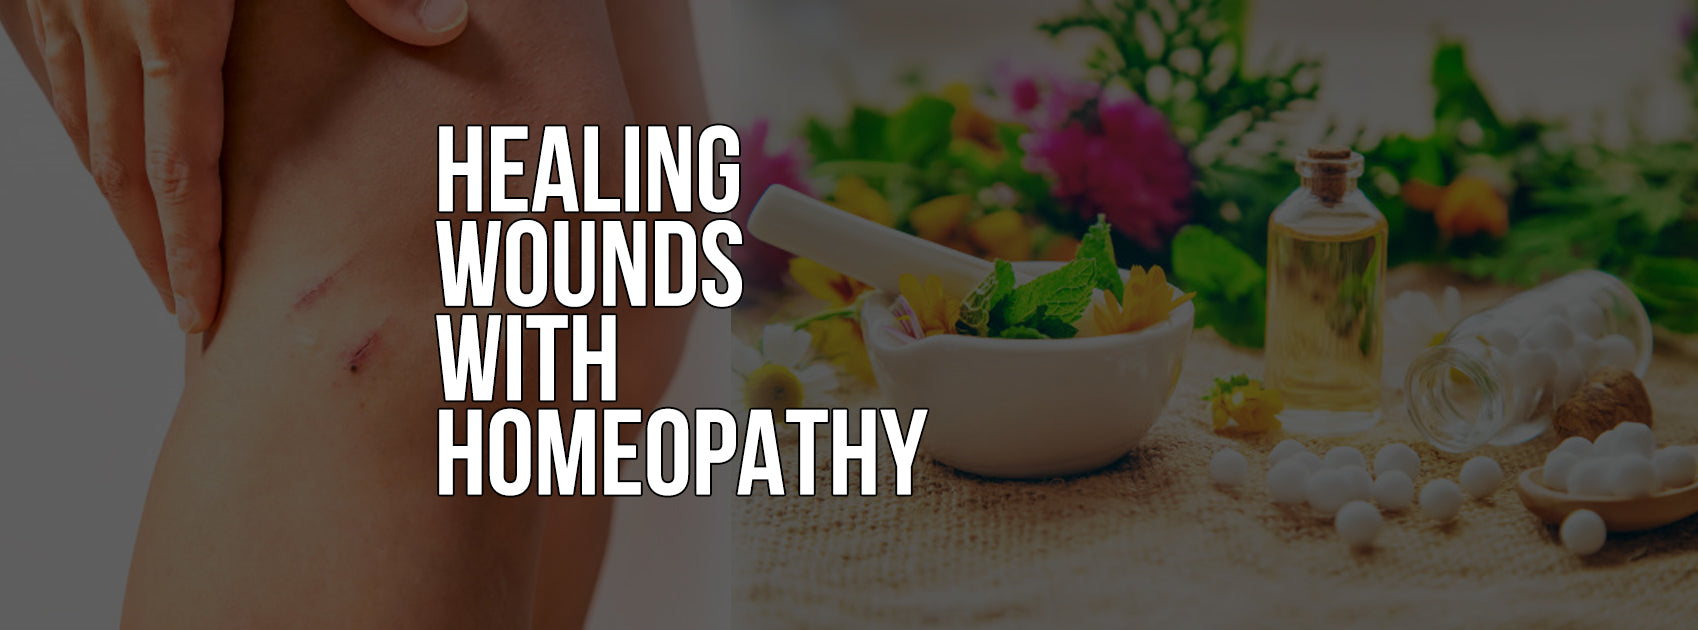 HEALING WOUNDS NATURALLY WITH HOMEOPATHY